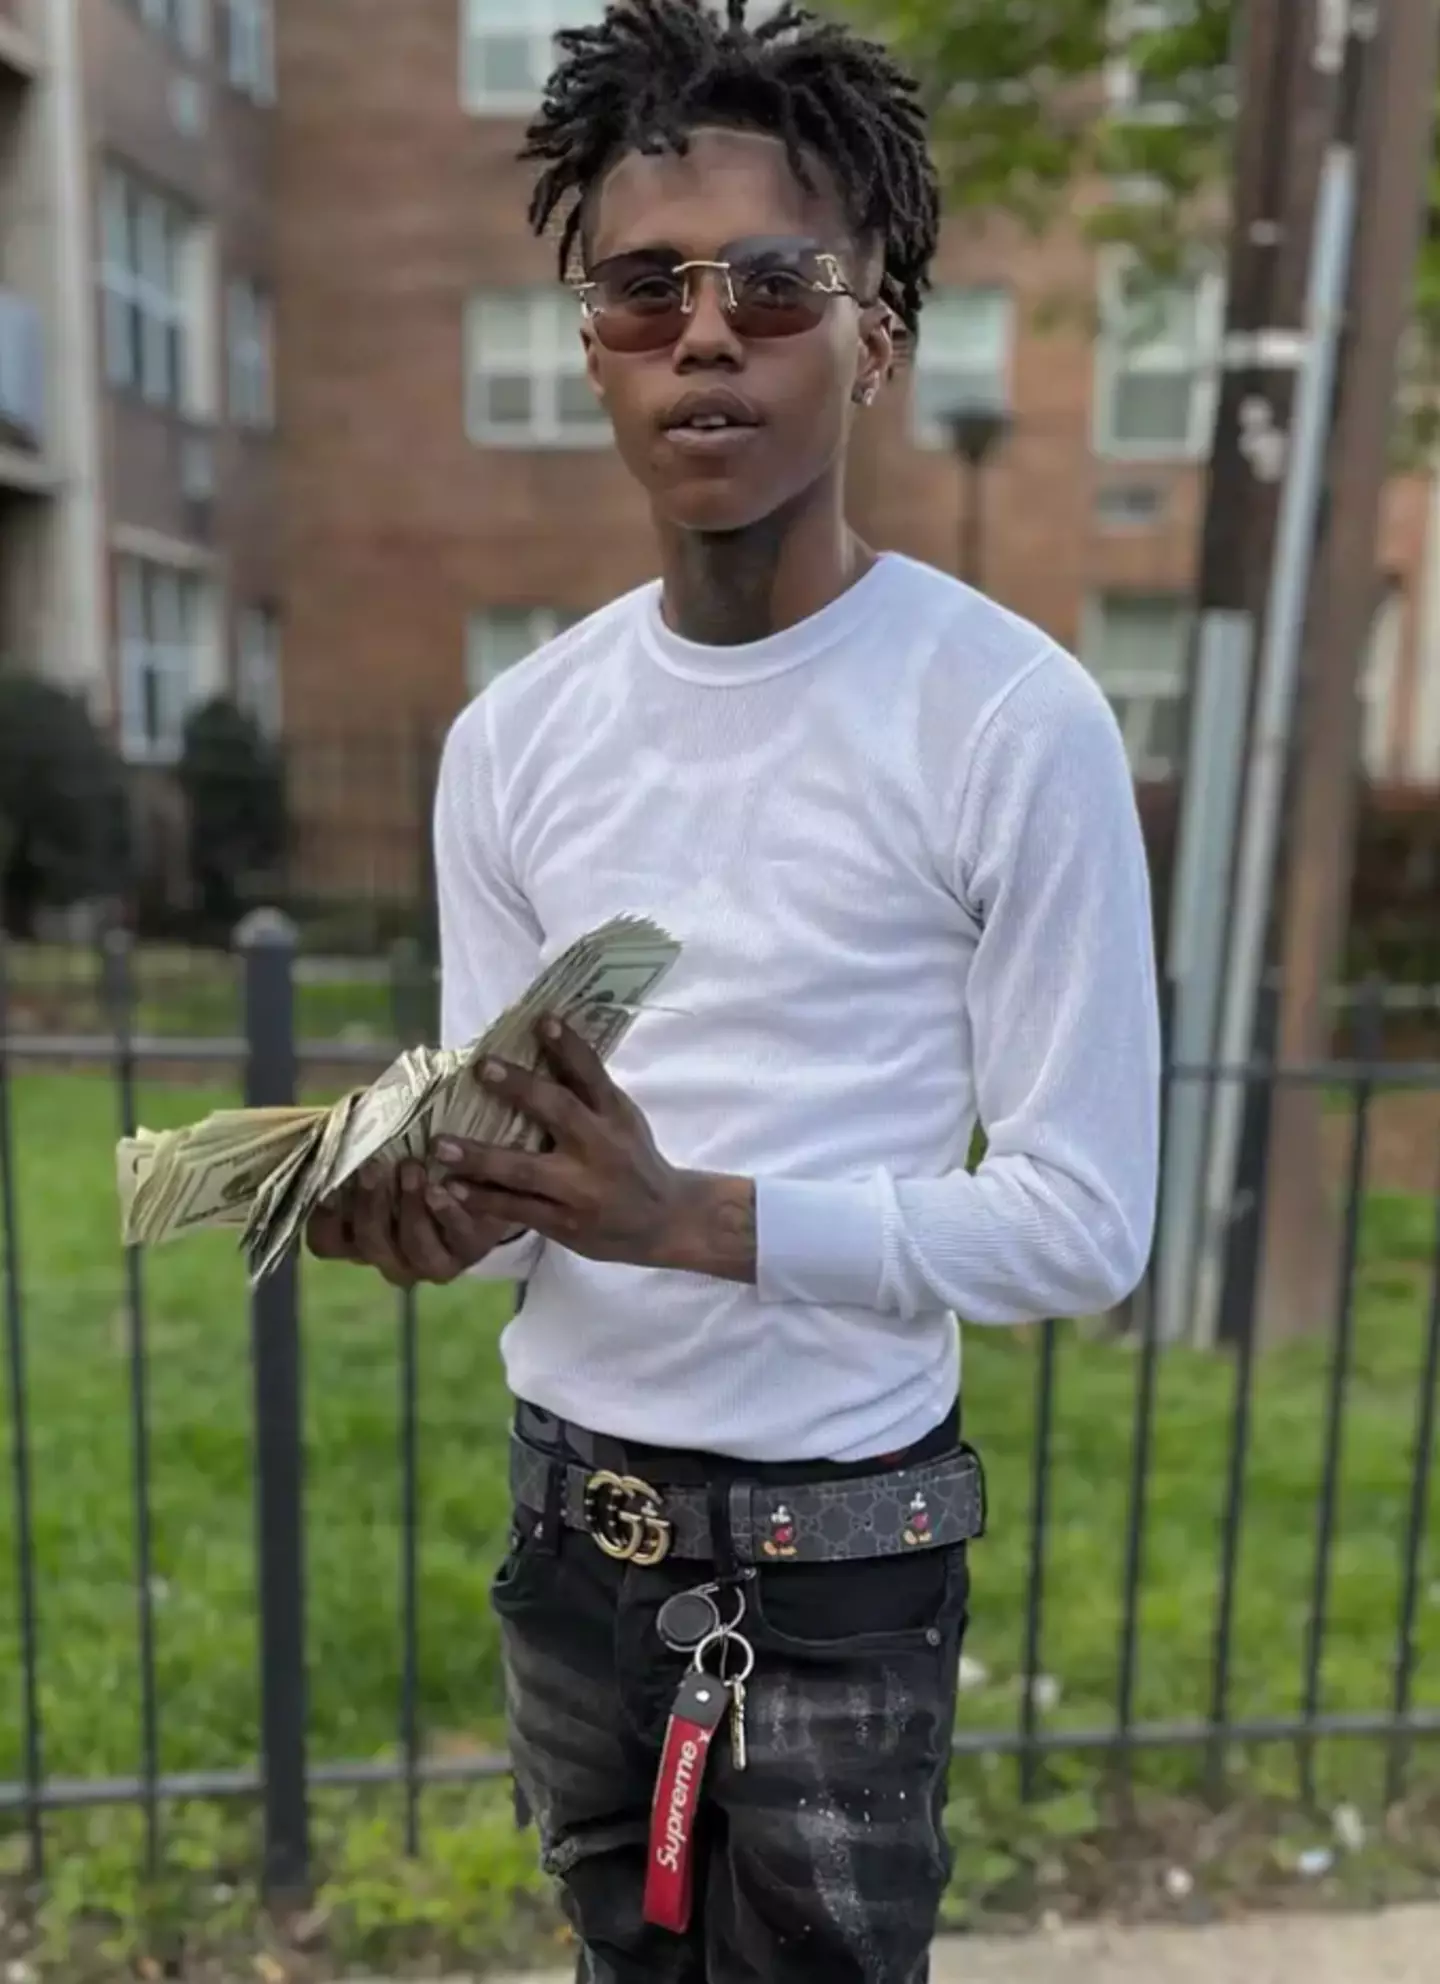 23 Rackz, 16, has been shot dead while filming a music video in Washington, DC.